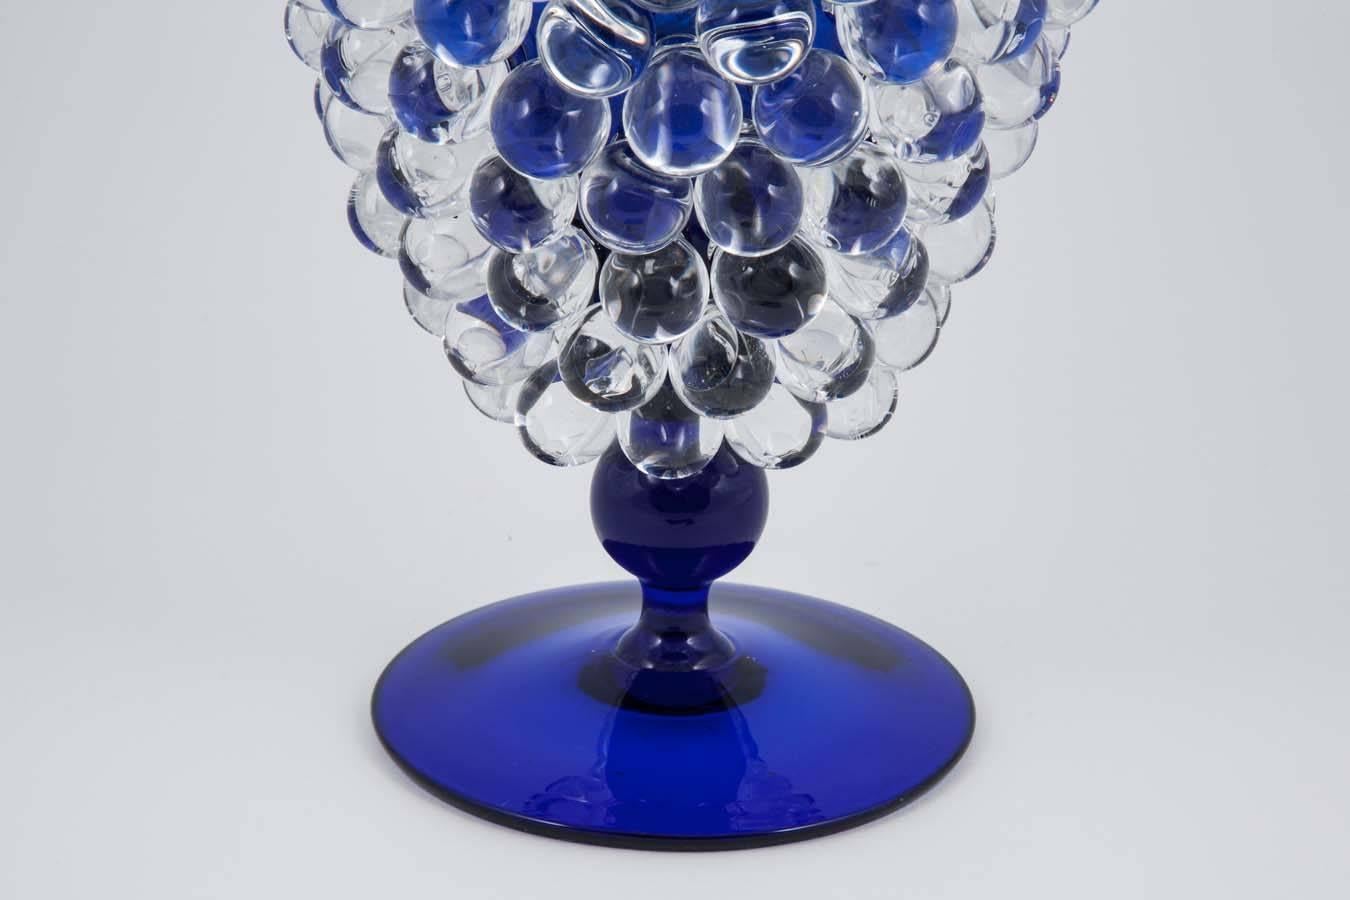 Organic Modern Empoli Jar with Thistle, a unique clear & blue glass vessel by James Lethbridge